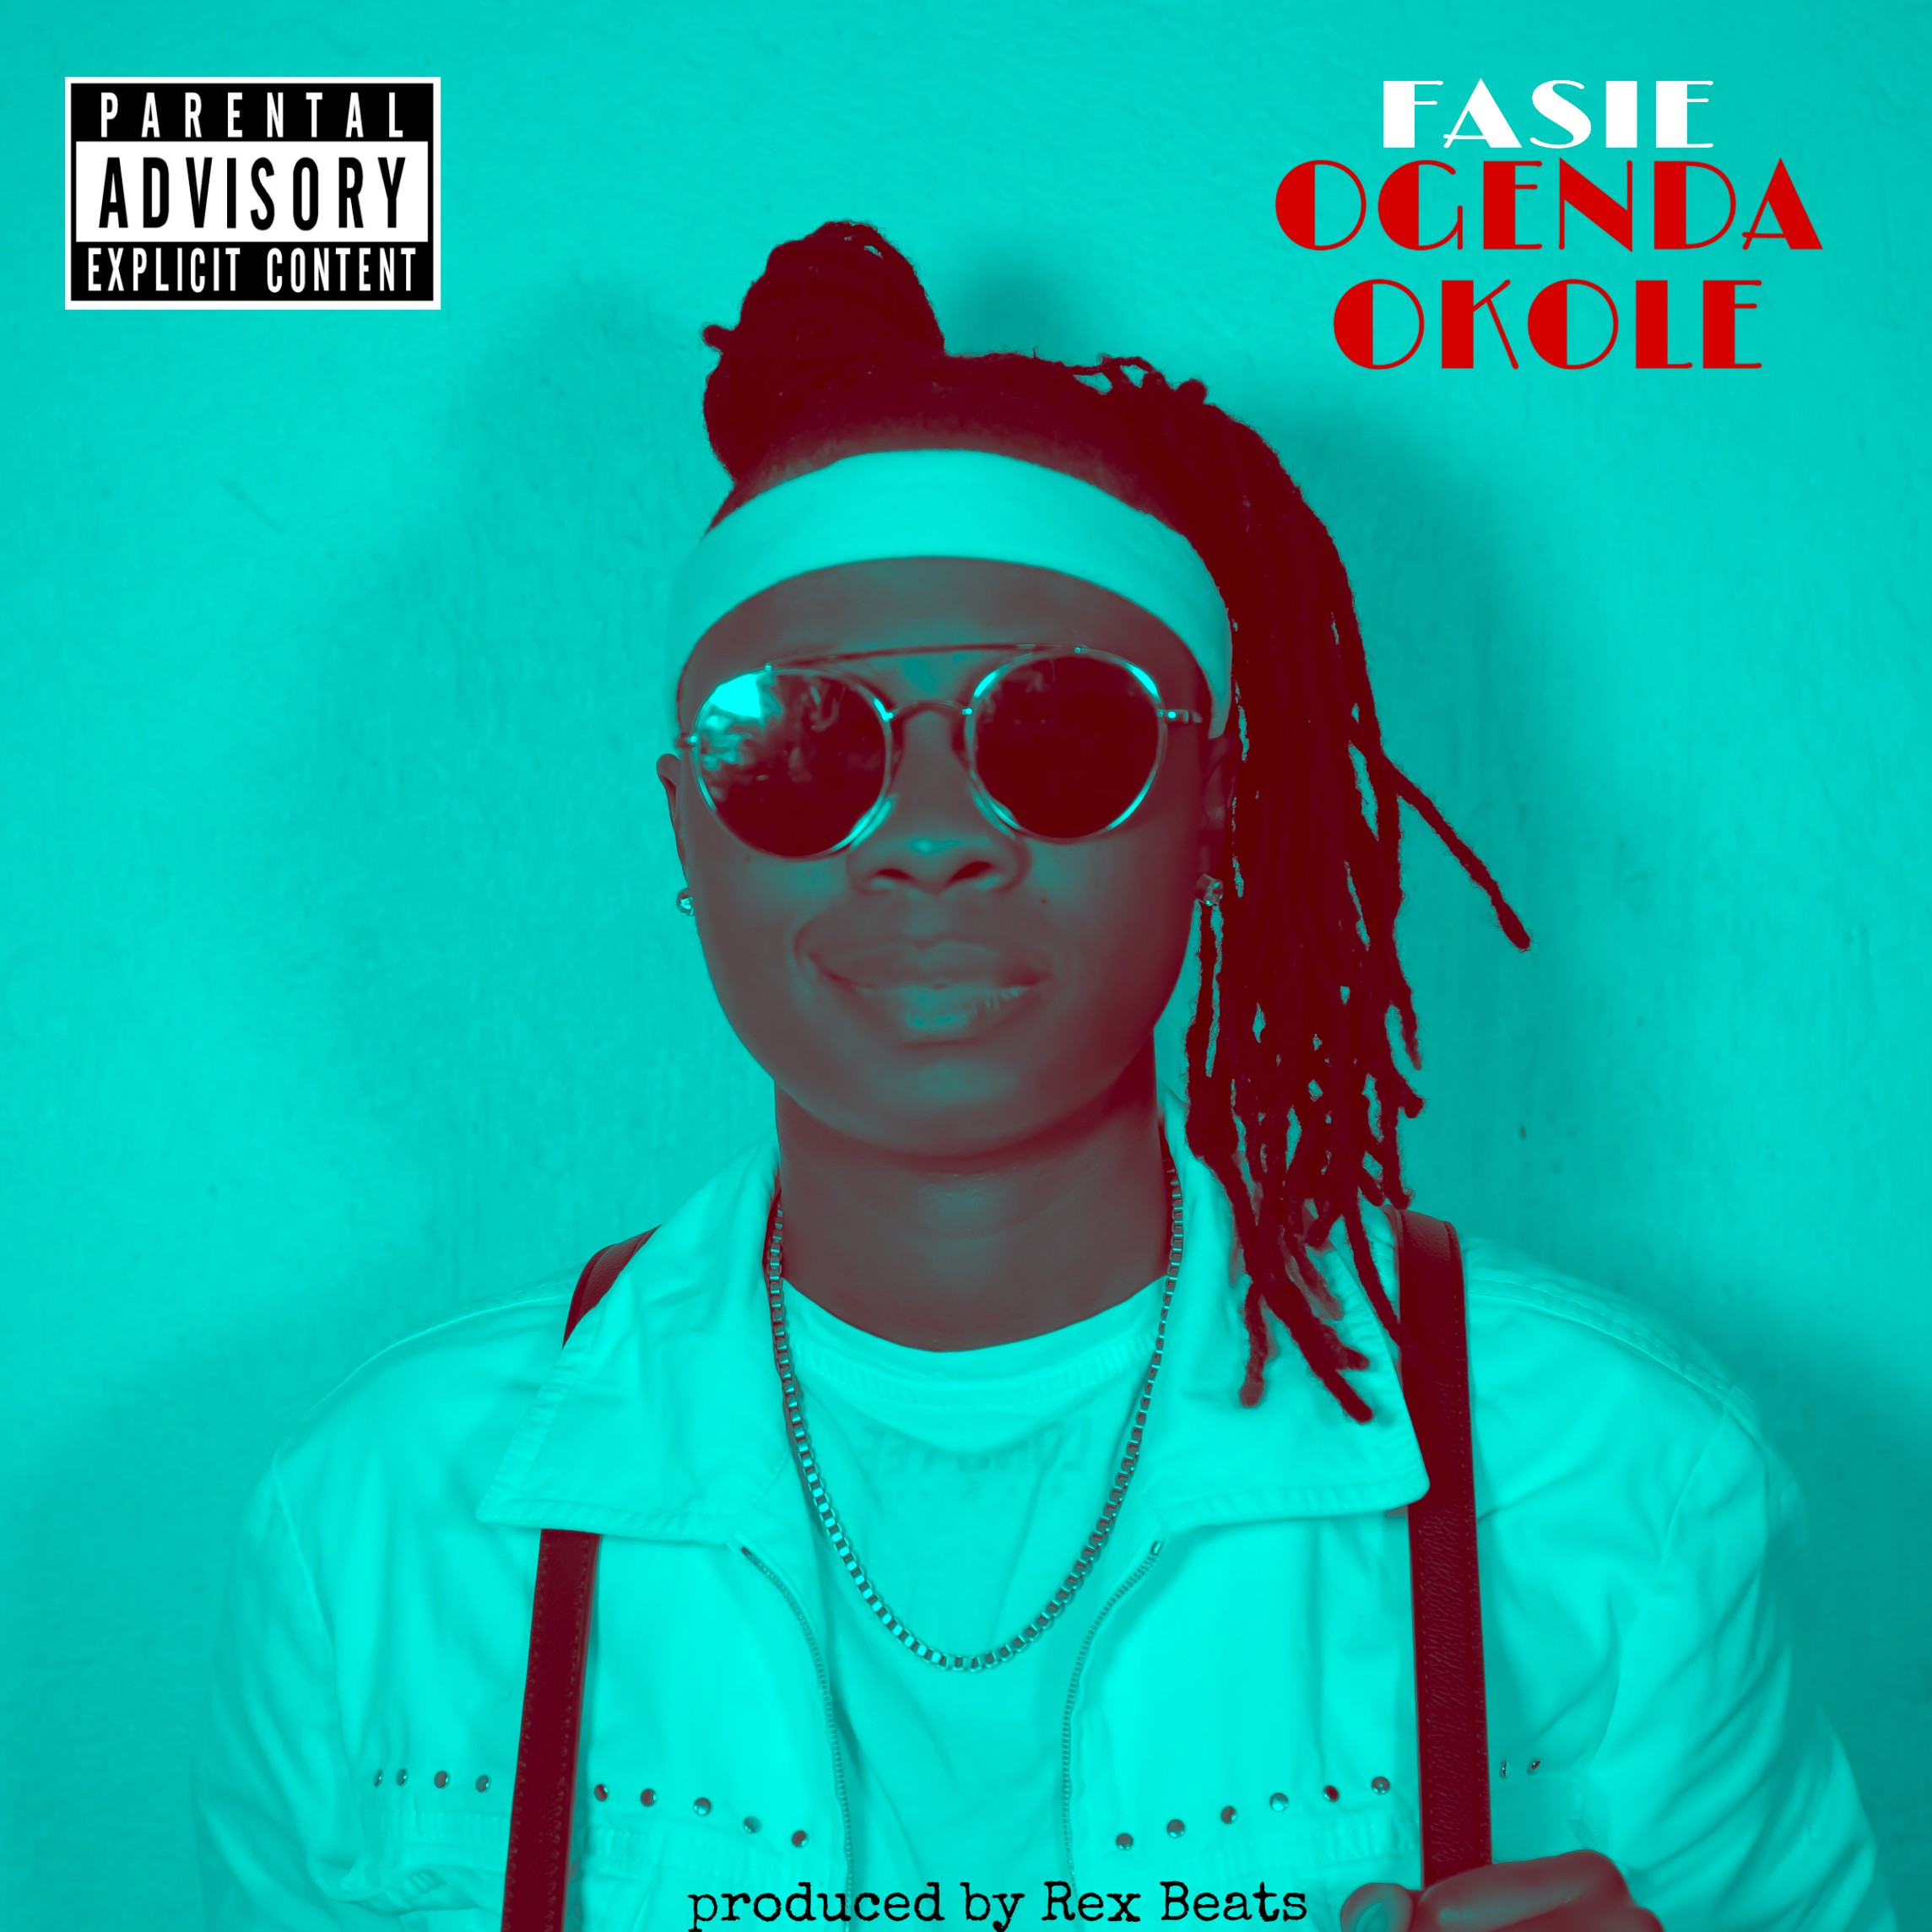 Fasie’s “Genda Okole” reminds us to cut the talk and grind